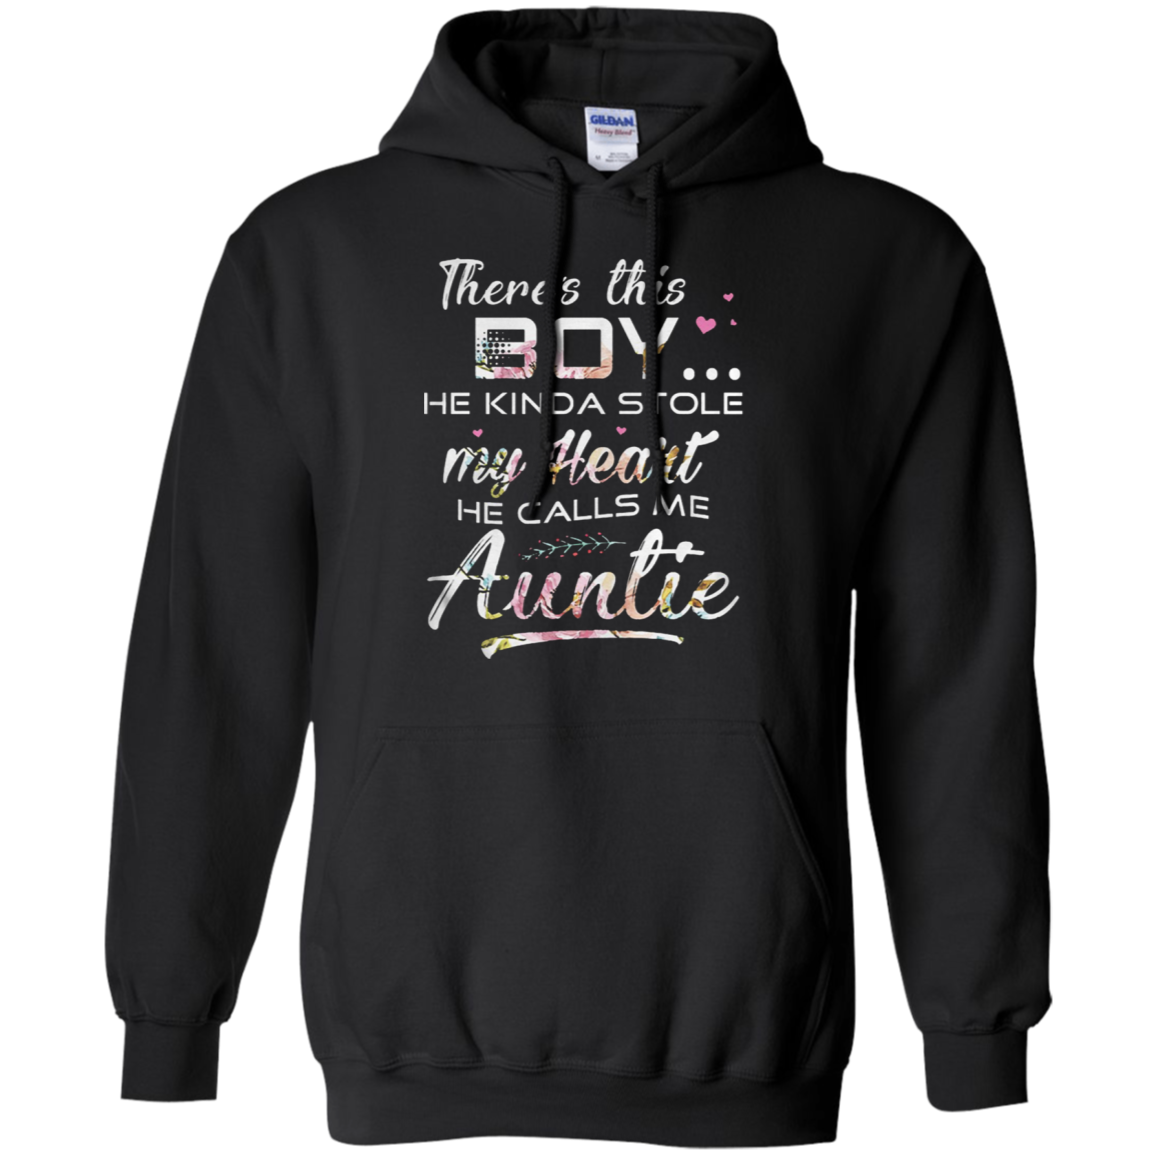 ThereÃ¤Ã³»s This Boy He Kinda Stole My Heart He Calls Me Auntie Shirts